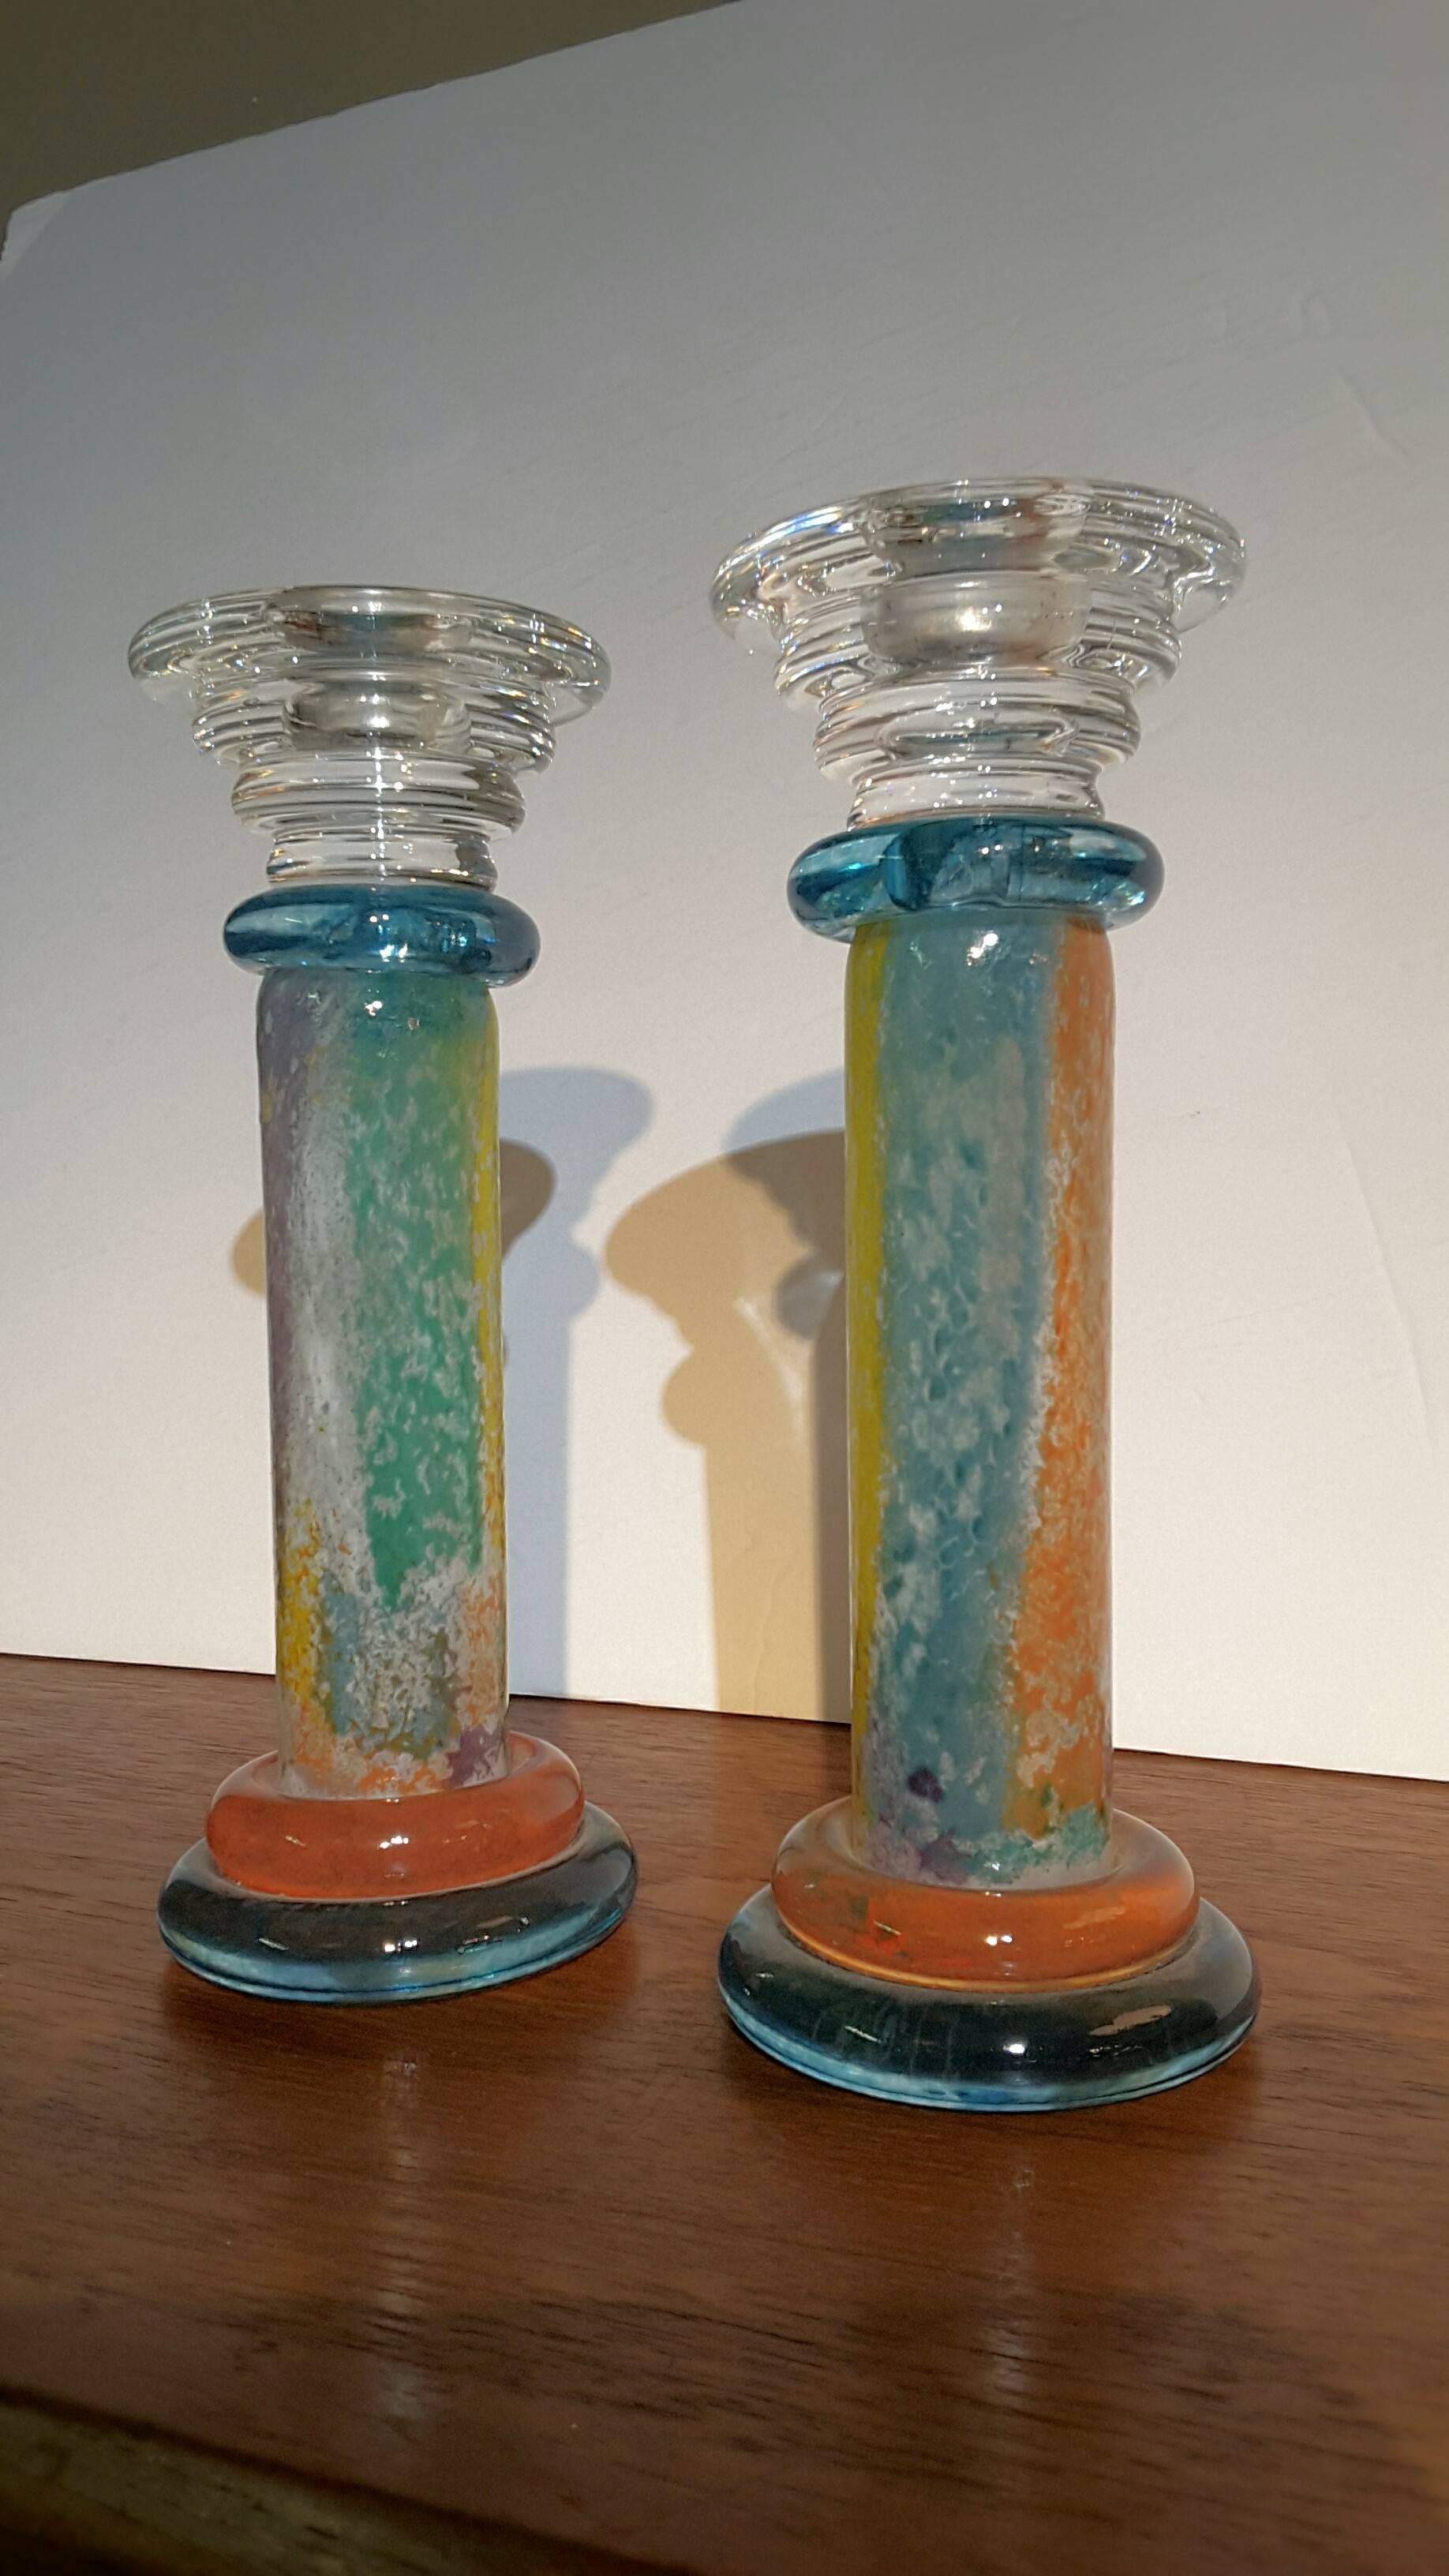 A pair of Kosta Boda art glass candlestick holders designed by Kjell Engman. The candlestick holders features a rounded blue base with a second orange/ red base on which stands a cylindrical column decorated in textured hues of yellow, blue, and